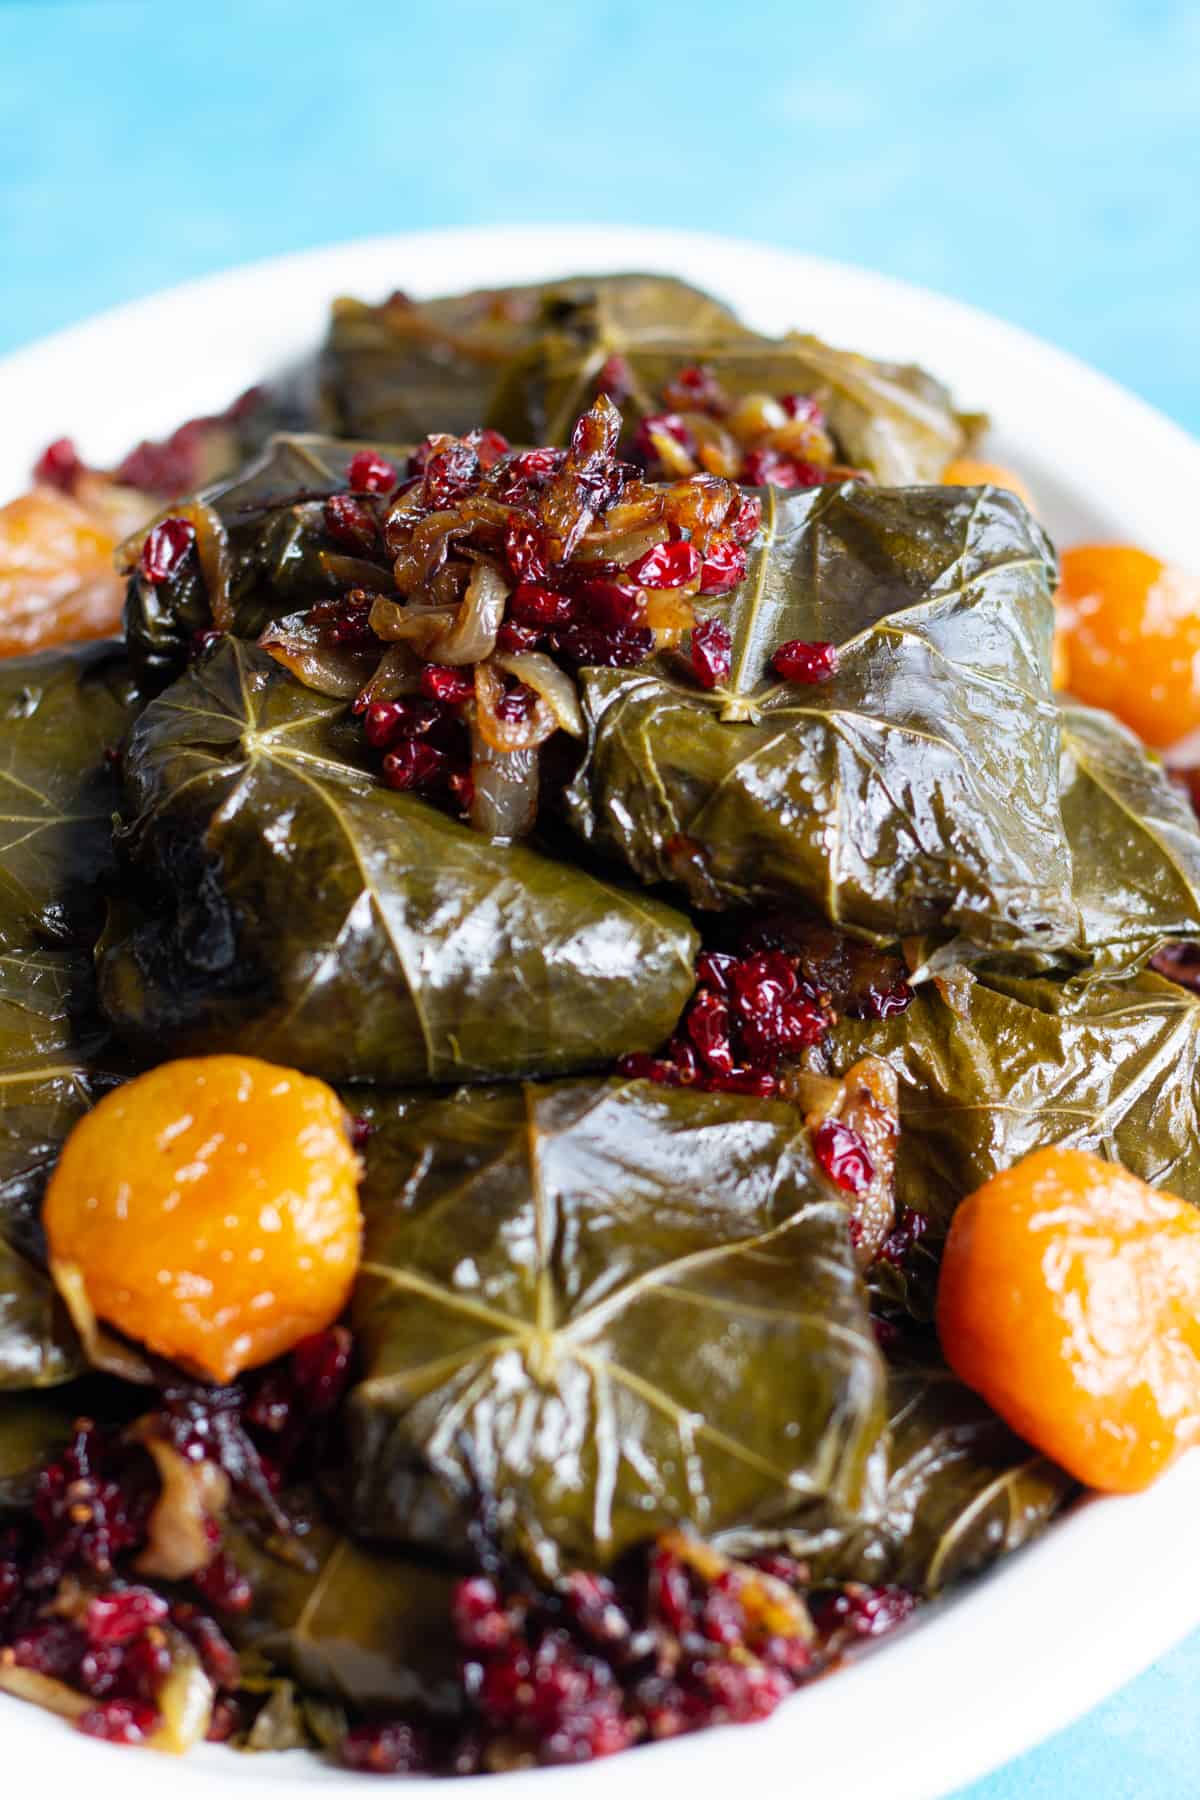 Dolmeh is a traditional Persian/Iranian dish and a family favorite. This version of stuffed grape leaves is made with meat, rice and herbs. 